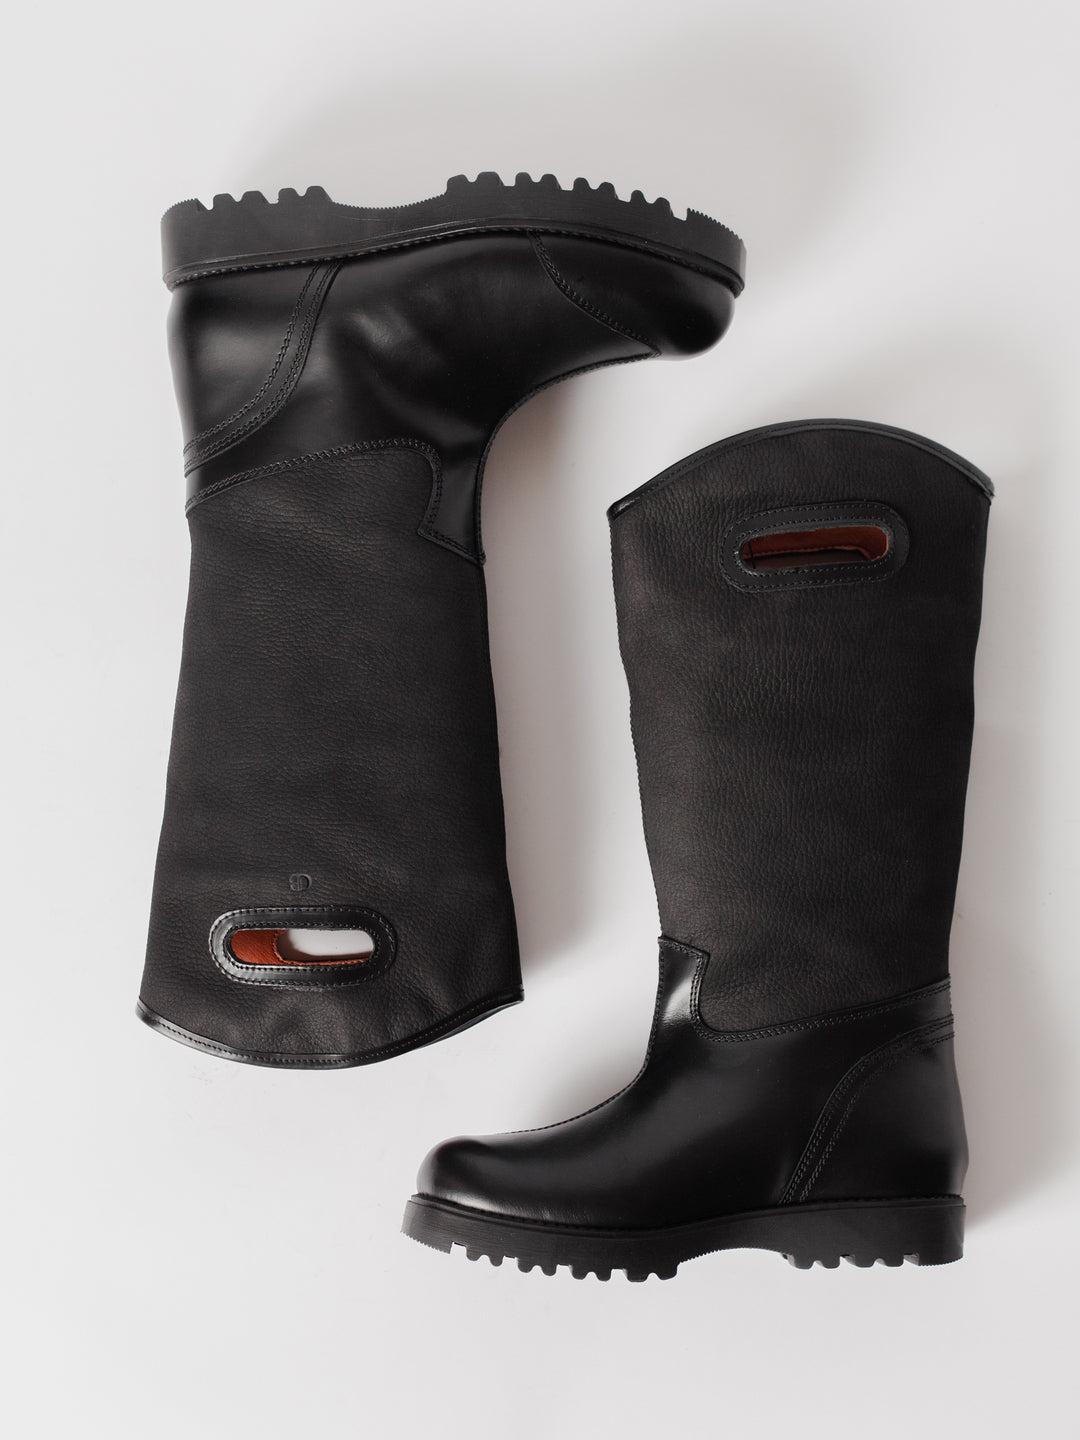 Blankens black boot with handles The Alexia High Black Eco